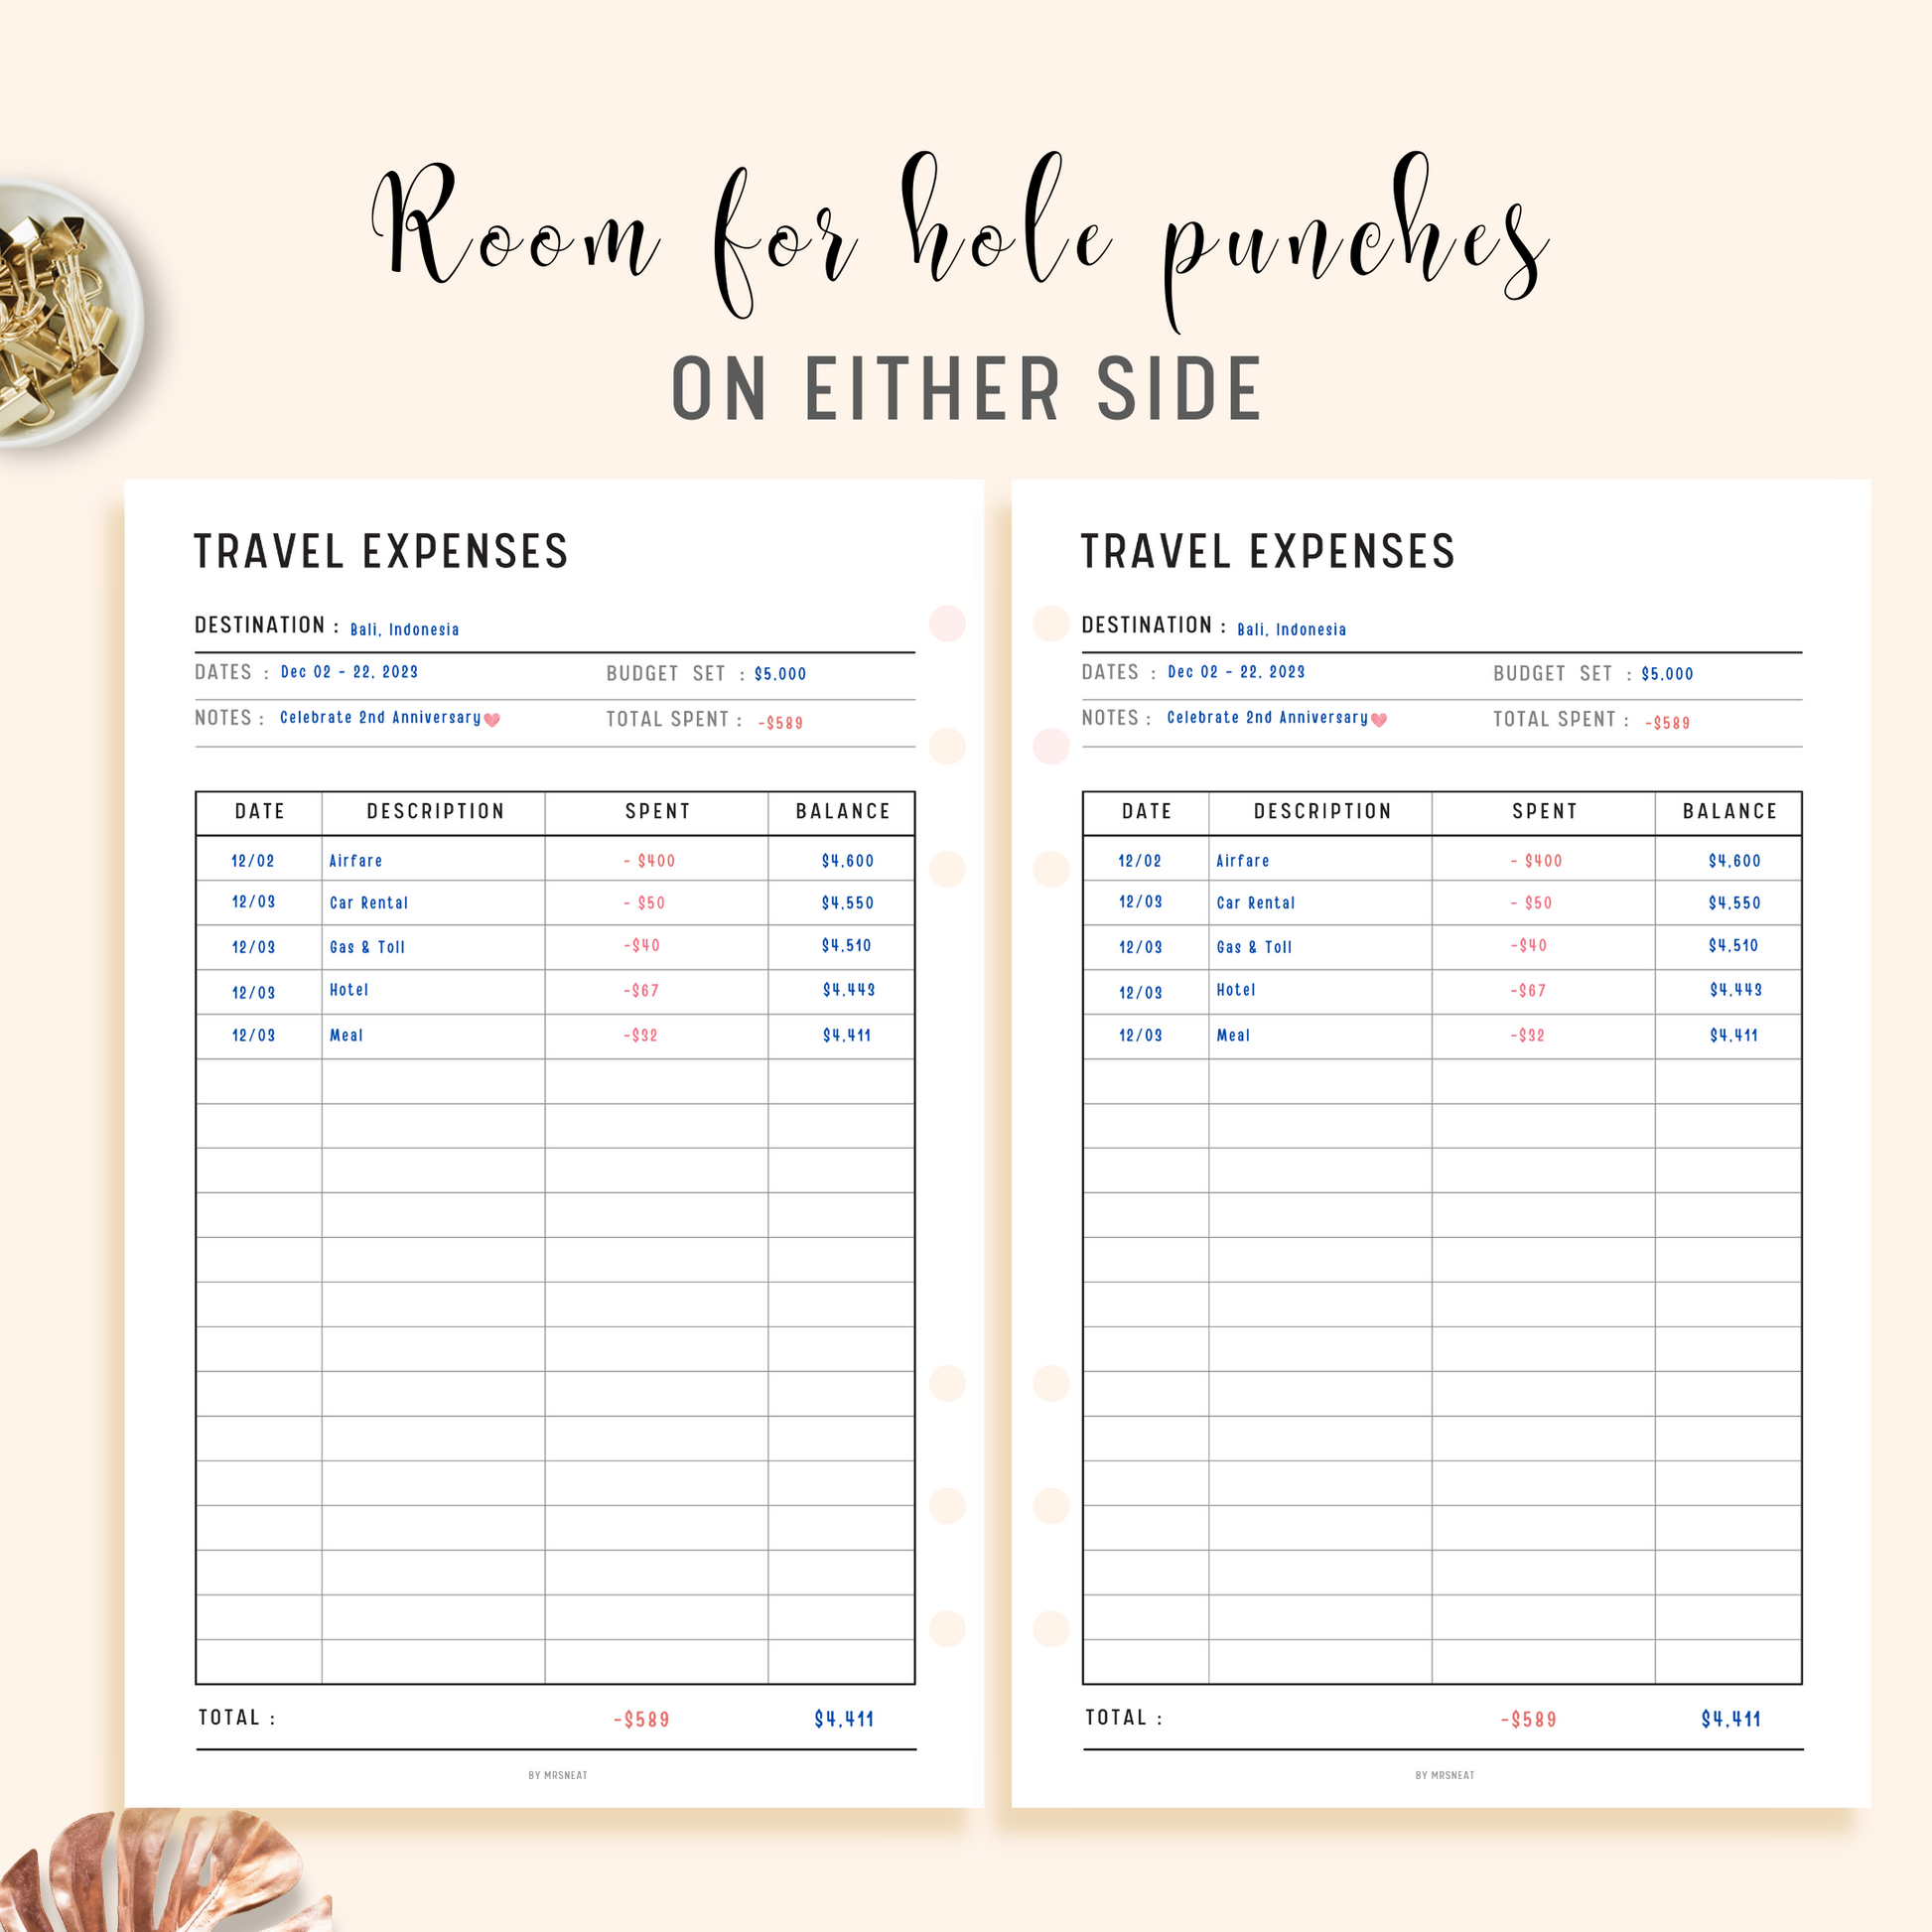 Travel Expenses Tracker Planner Printable with room for hole punches on either side